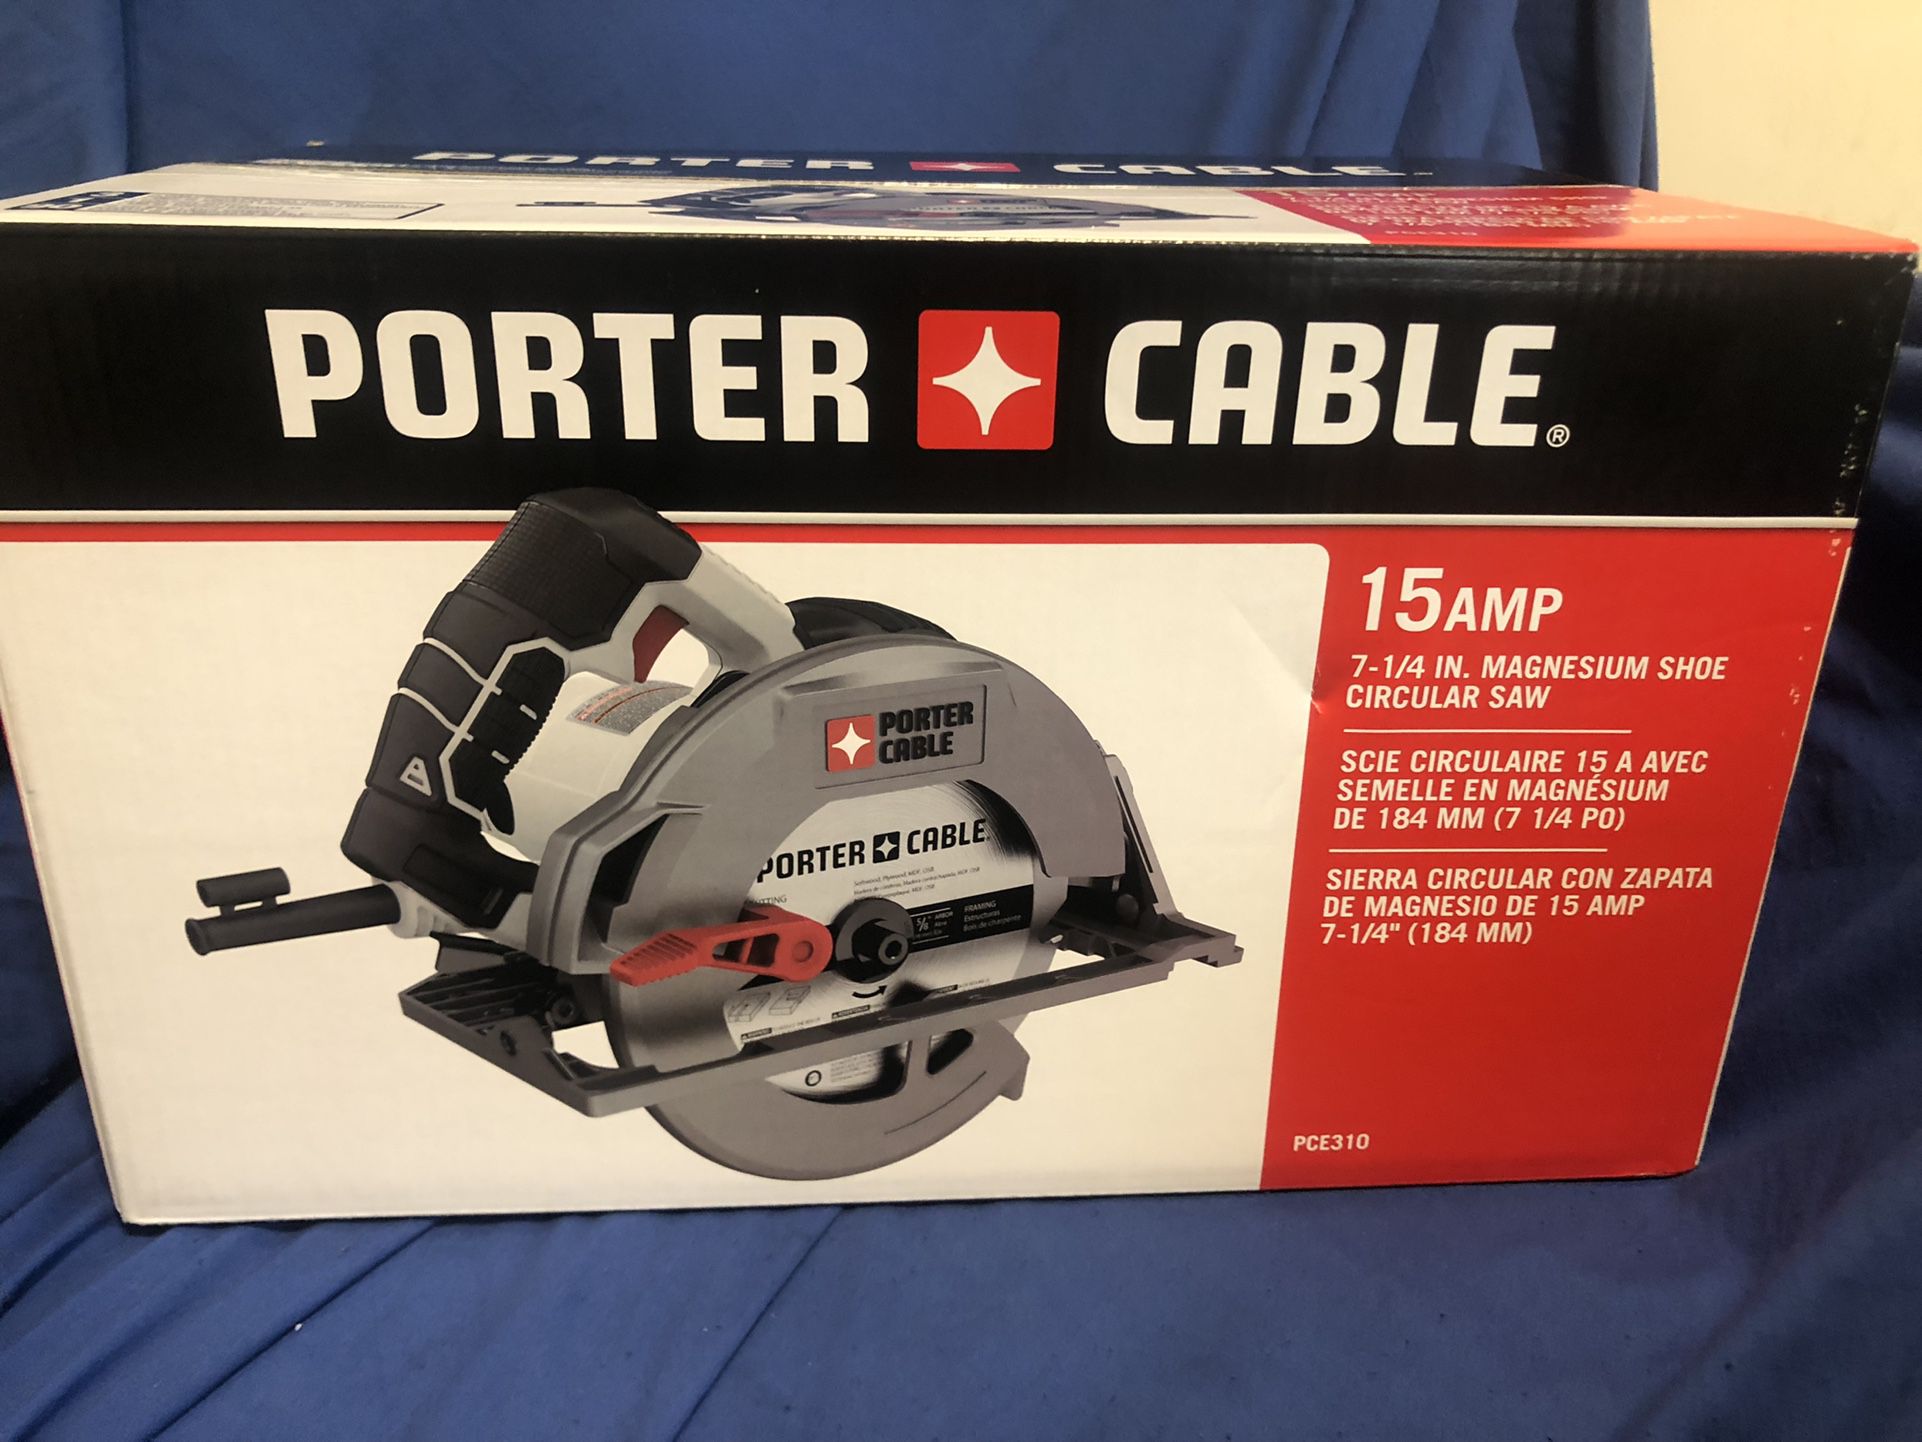 Porter cable circular saw for Sale in Albemarle, NC OfferUp